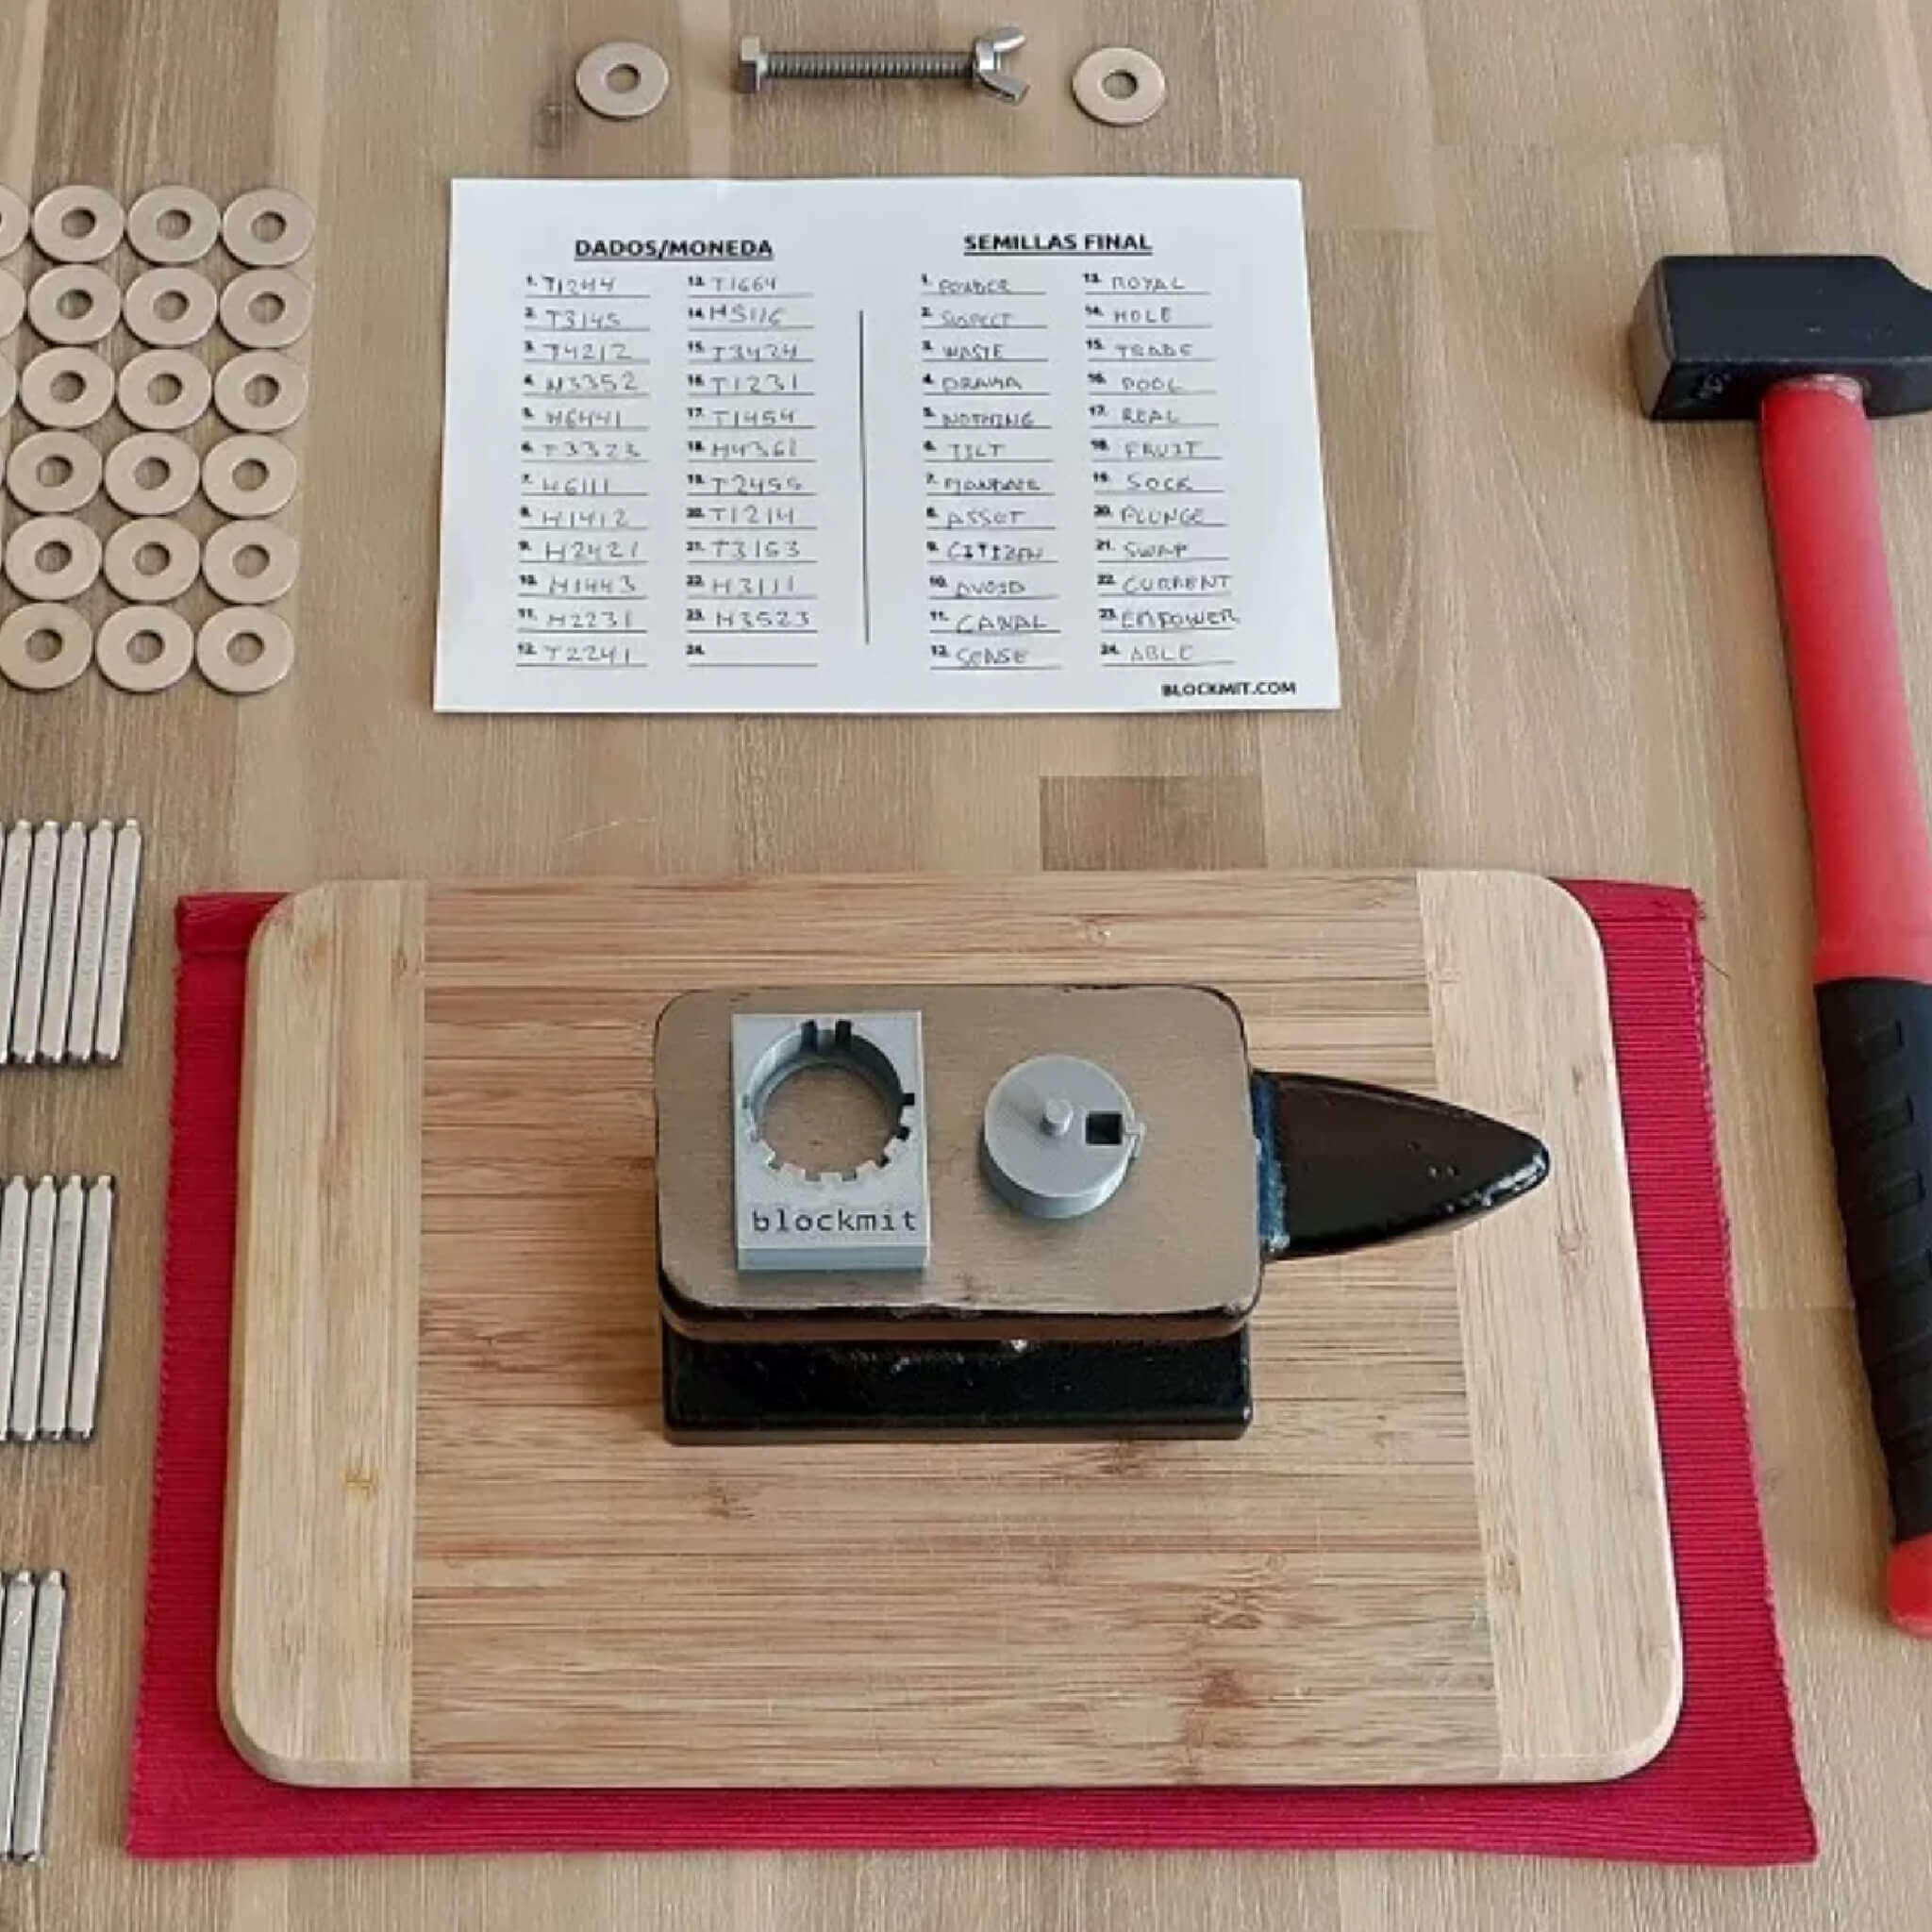 Cryptocloaks Blockmit Jig setup with washers, bolts, jig and seed phrase paper